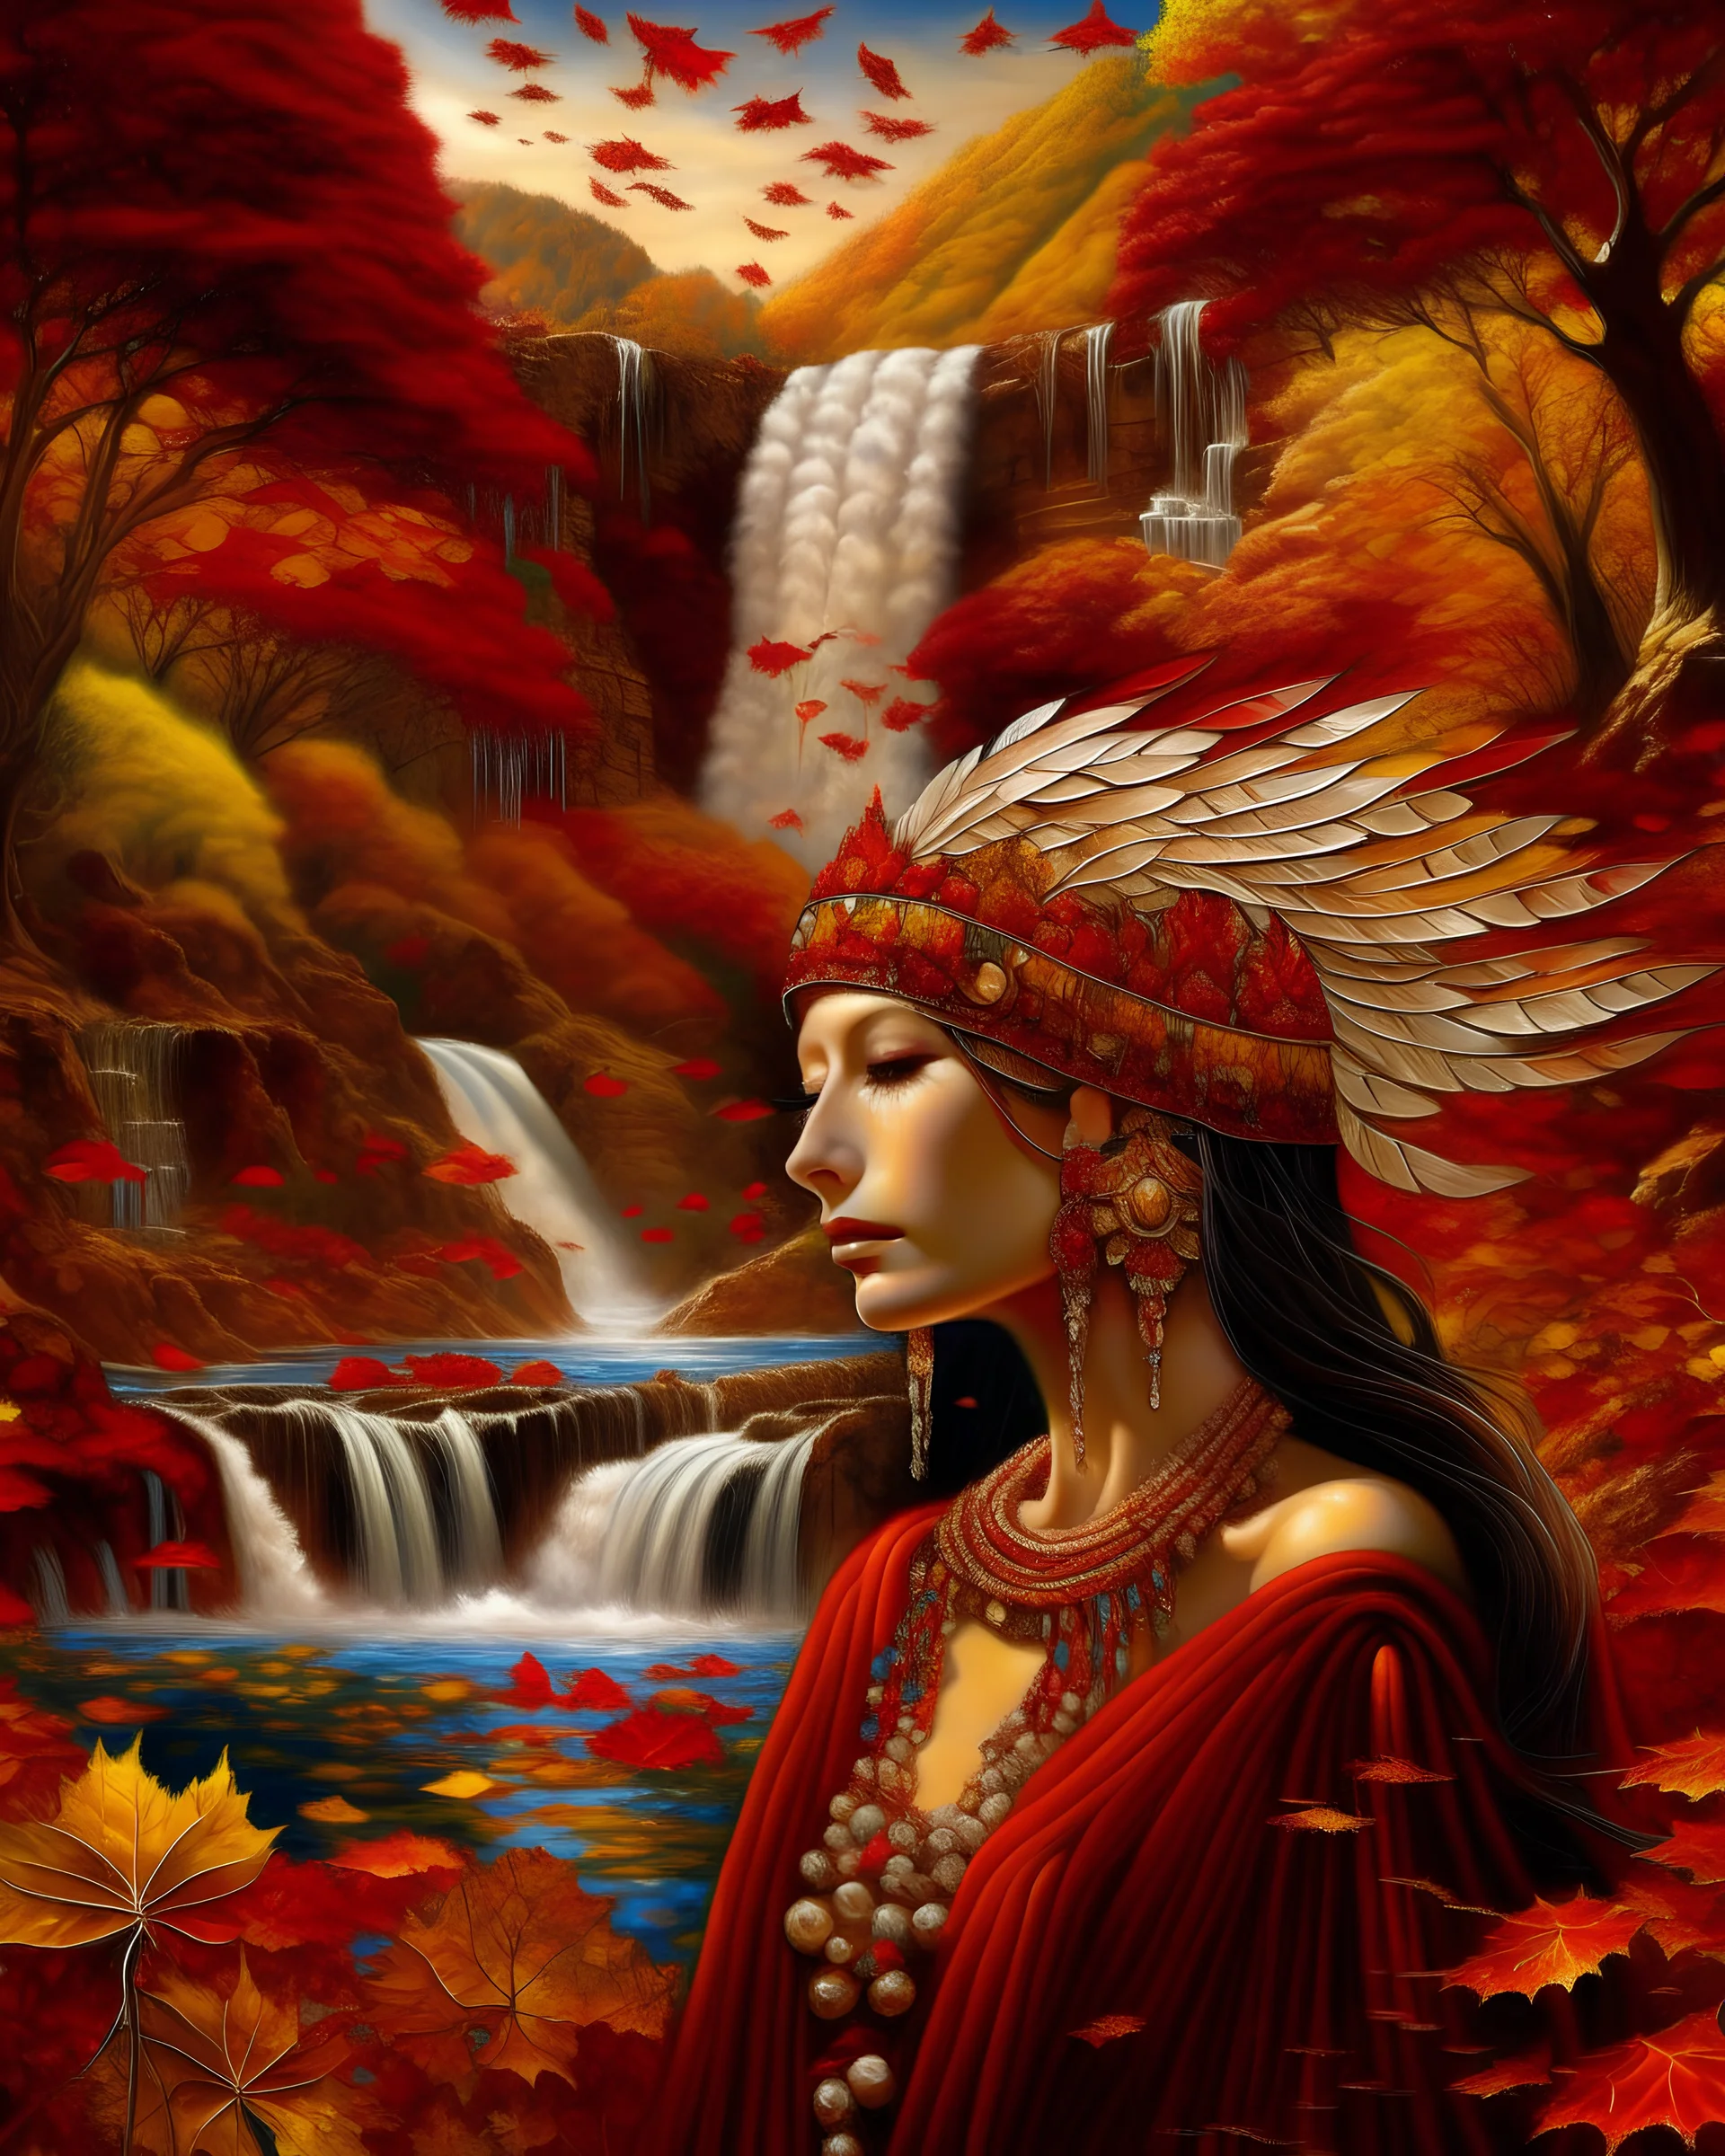 Create a chrystal paralele landscape beige white within the headdress mesmerizing red trees heart tree waterfall falls down from the tears on woman head the woman wearing a landscape art golden water fall headdress flows down her face headdress baroque garden the garden is full of flowers colourful on the golden river baroque sailor fregatt ships intricate detailed photoreal art bokeh lights background venetian masque on the woman portrait cannon 600 D shot photoreal